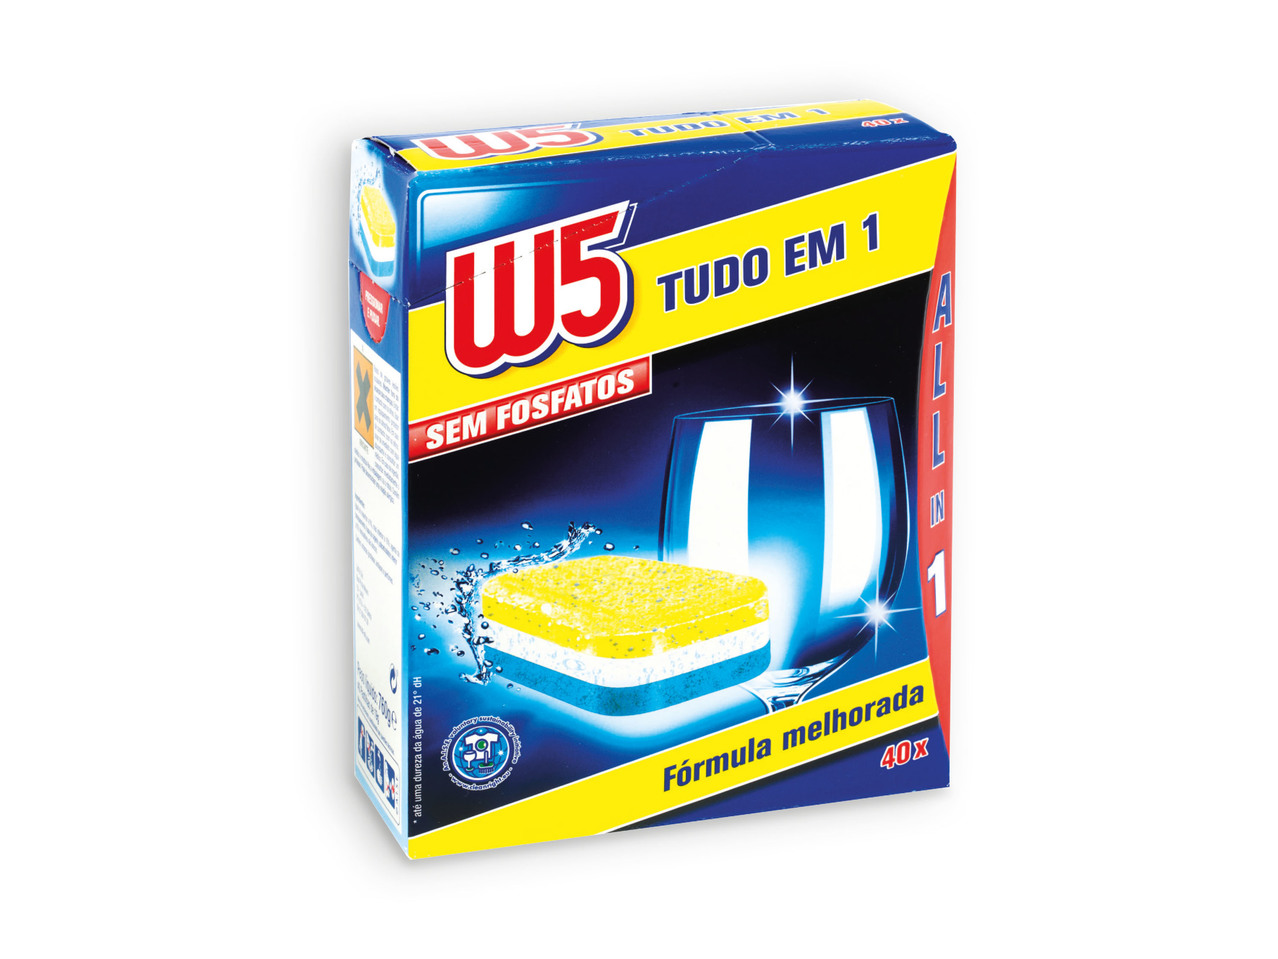 W5(R) Pastilhas para Máquina All in One